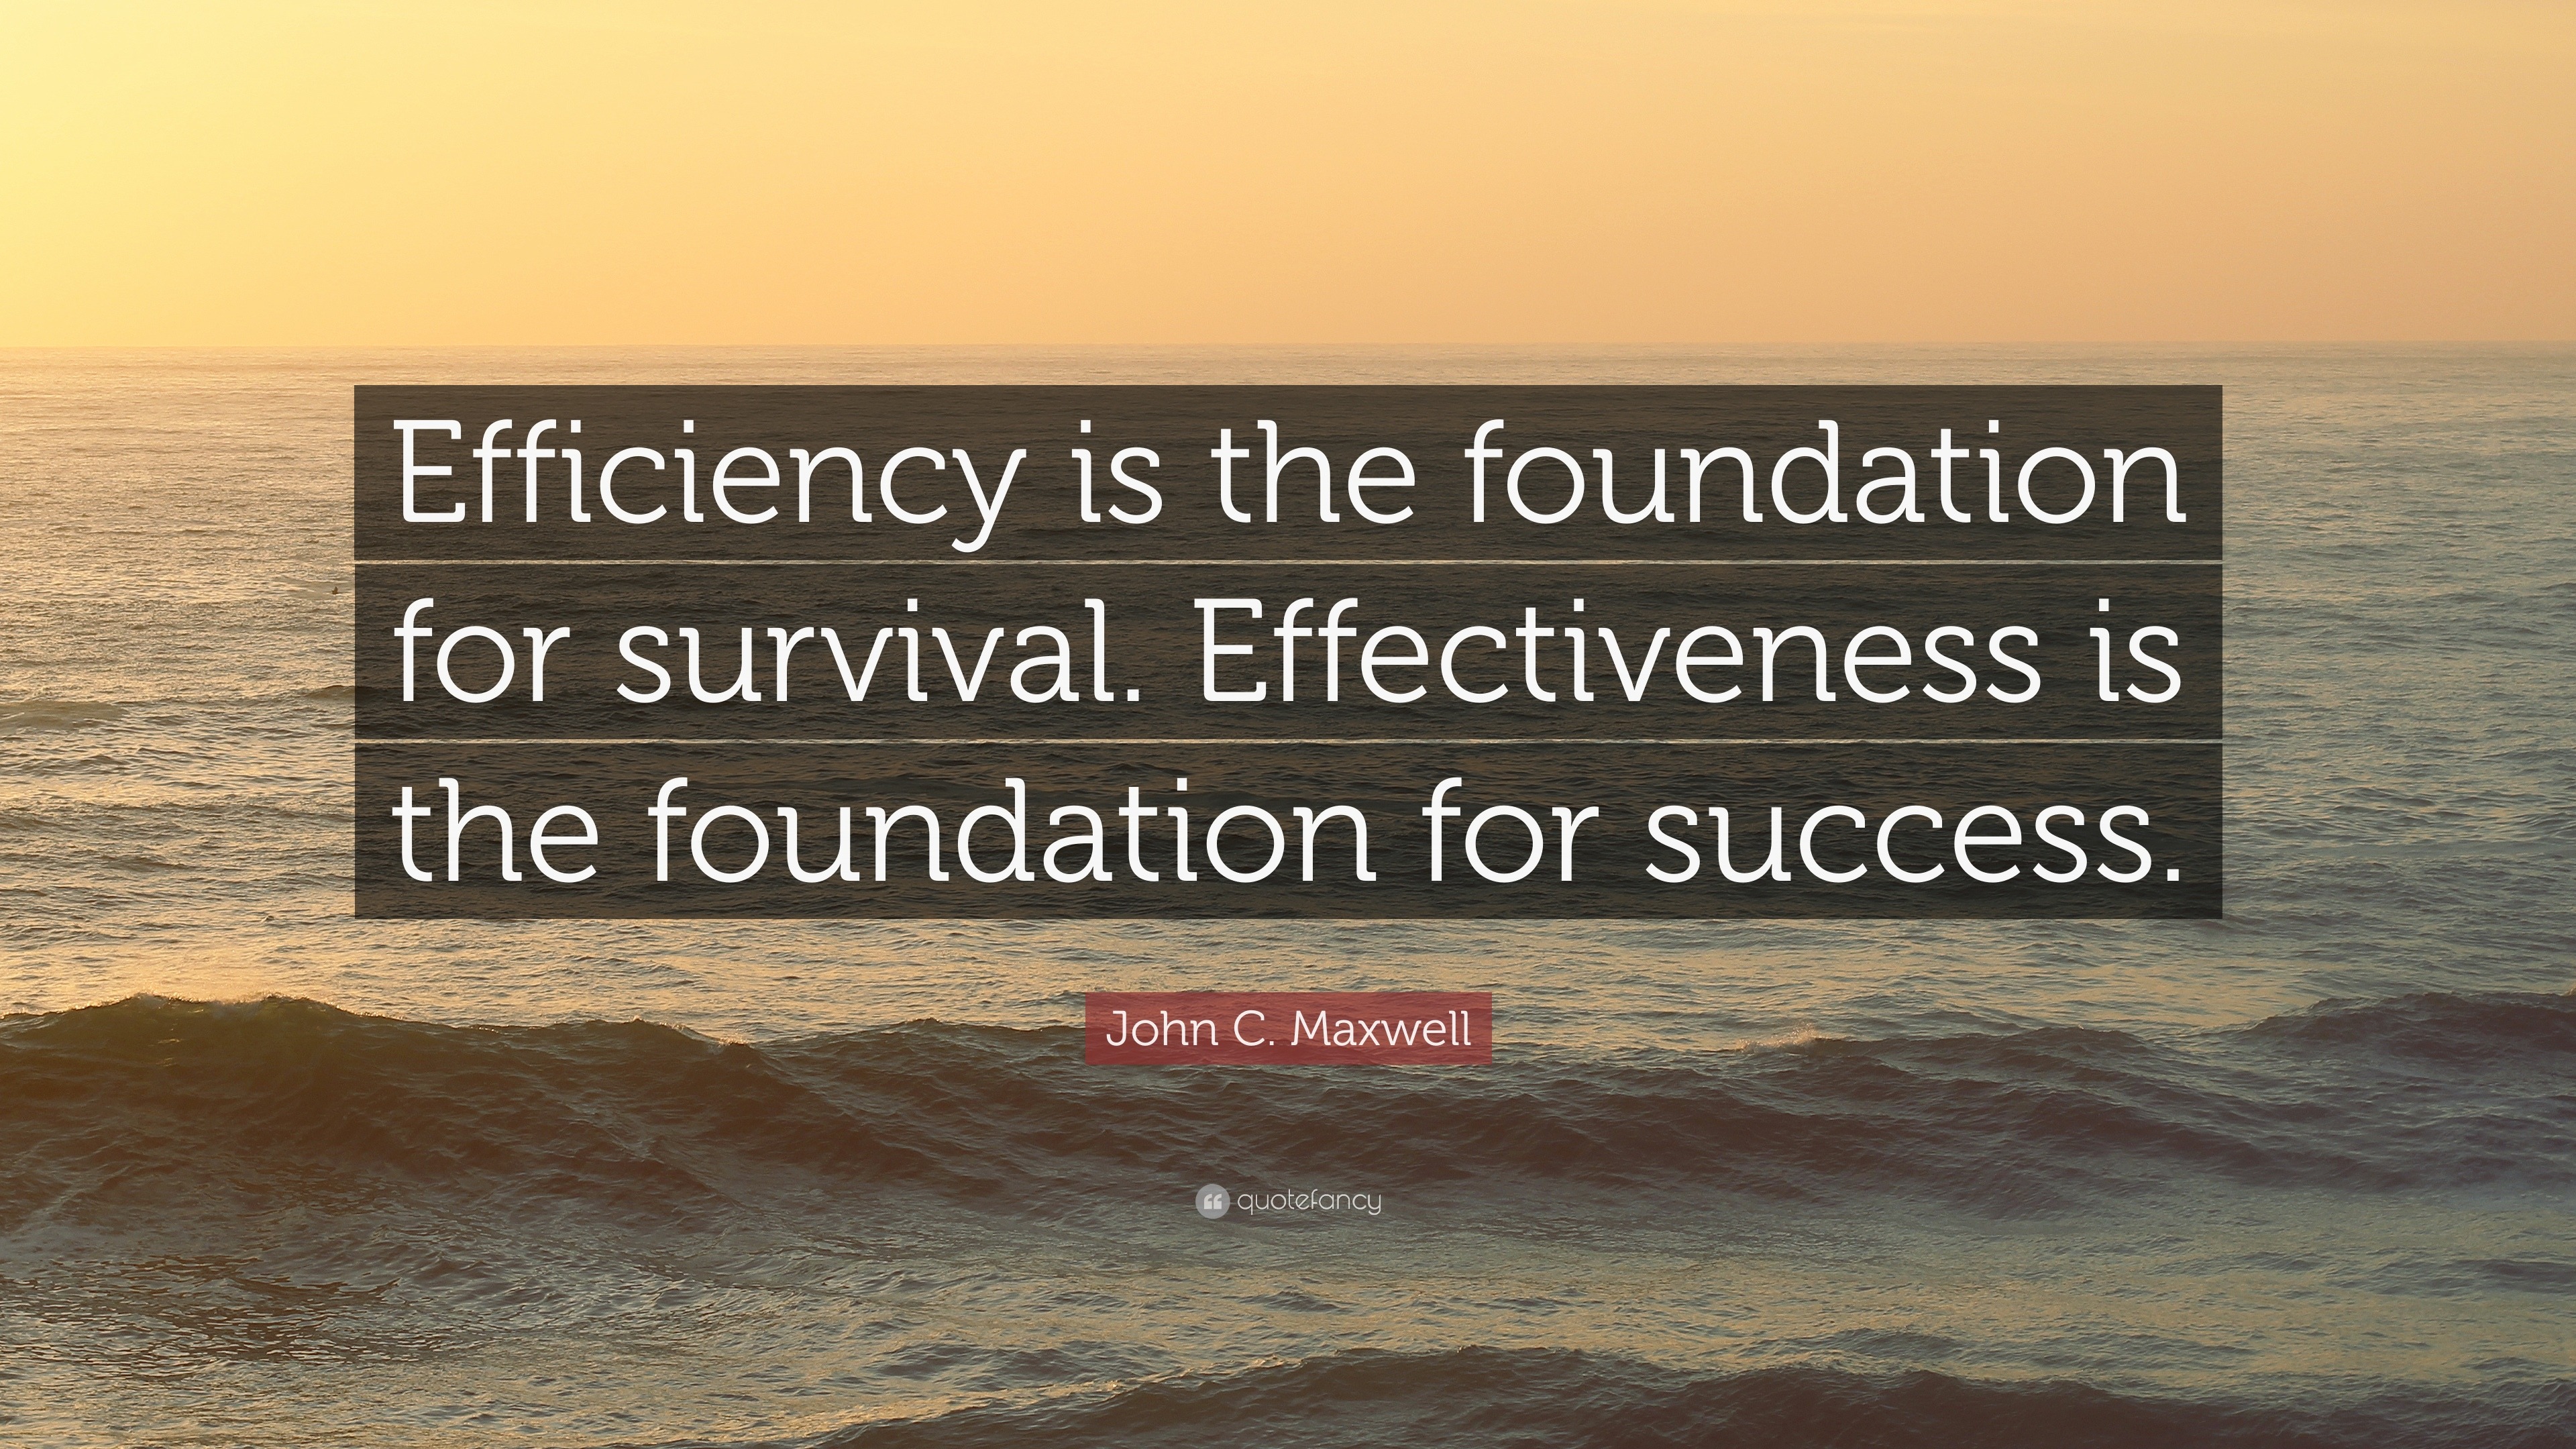 John C. Maxwell Quote: “Efficiency is the foundation for survival